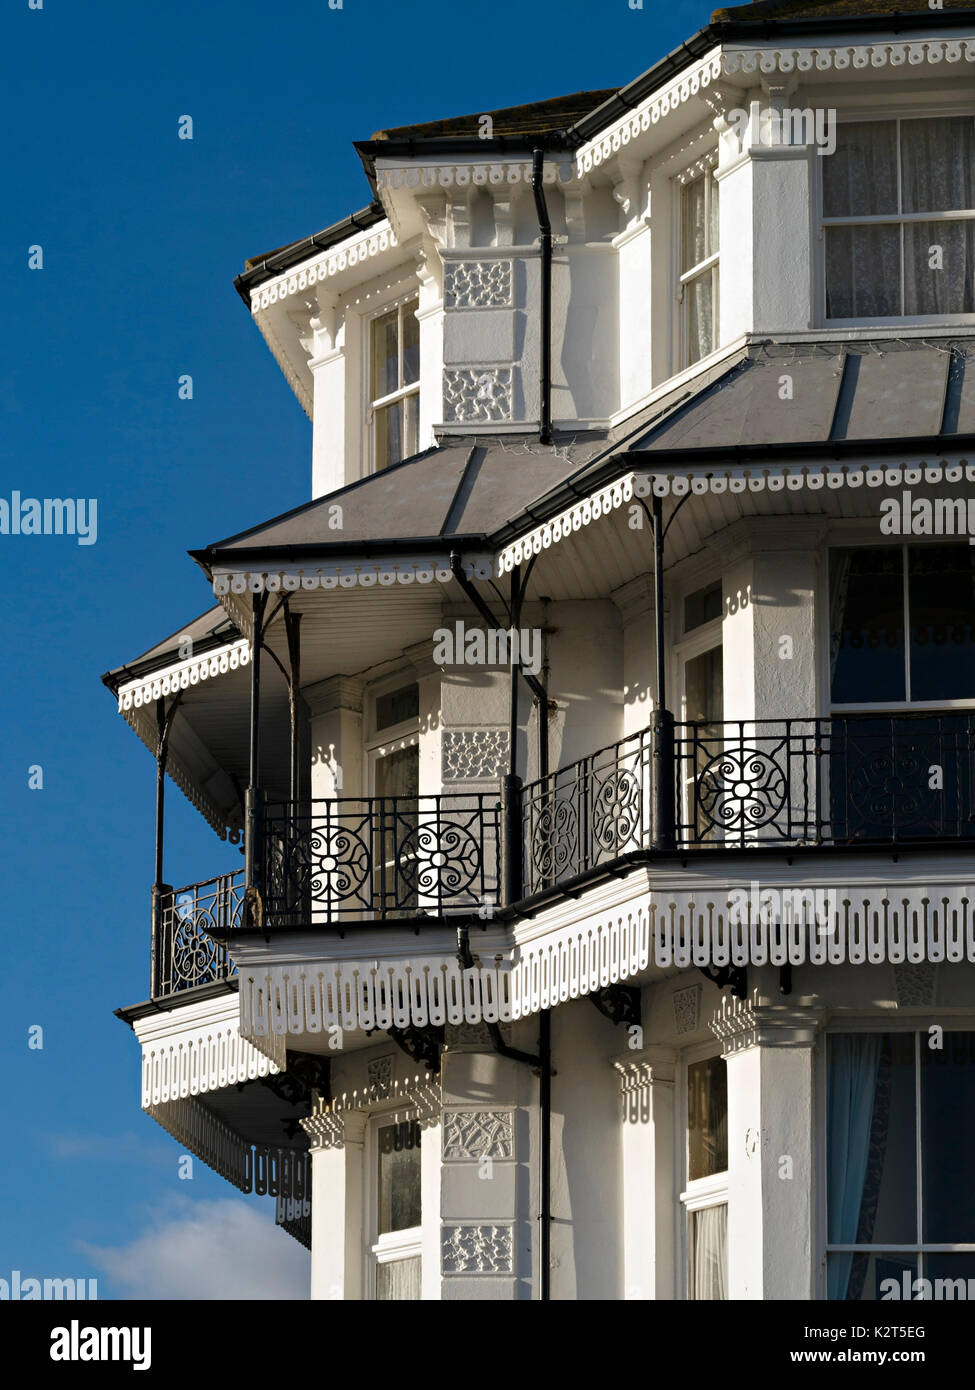 Ornate Victorian balconies, wrought iron balustrade railings and architecture, East Beach Hotel, Eastbourne Royal Parade, East Sussex, England, UK. Stock Photo